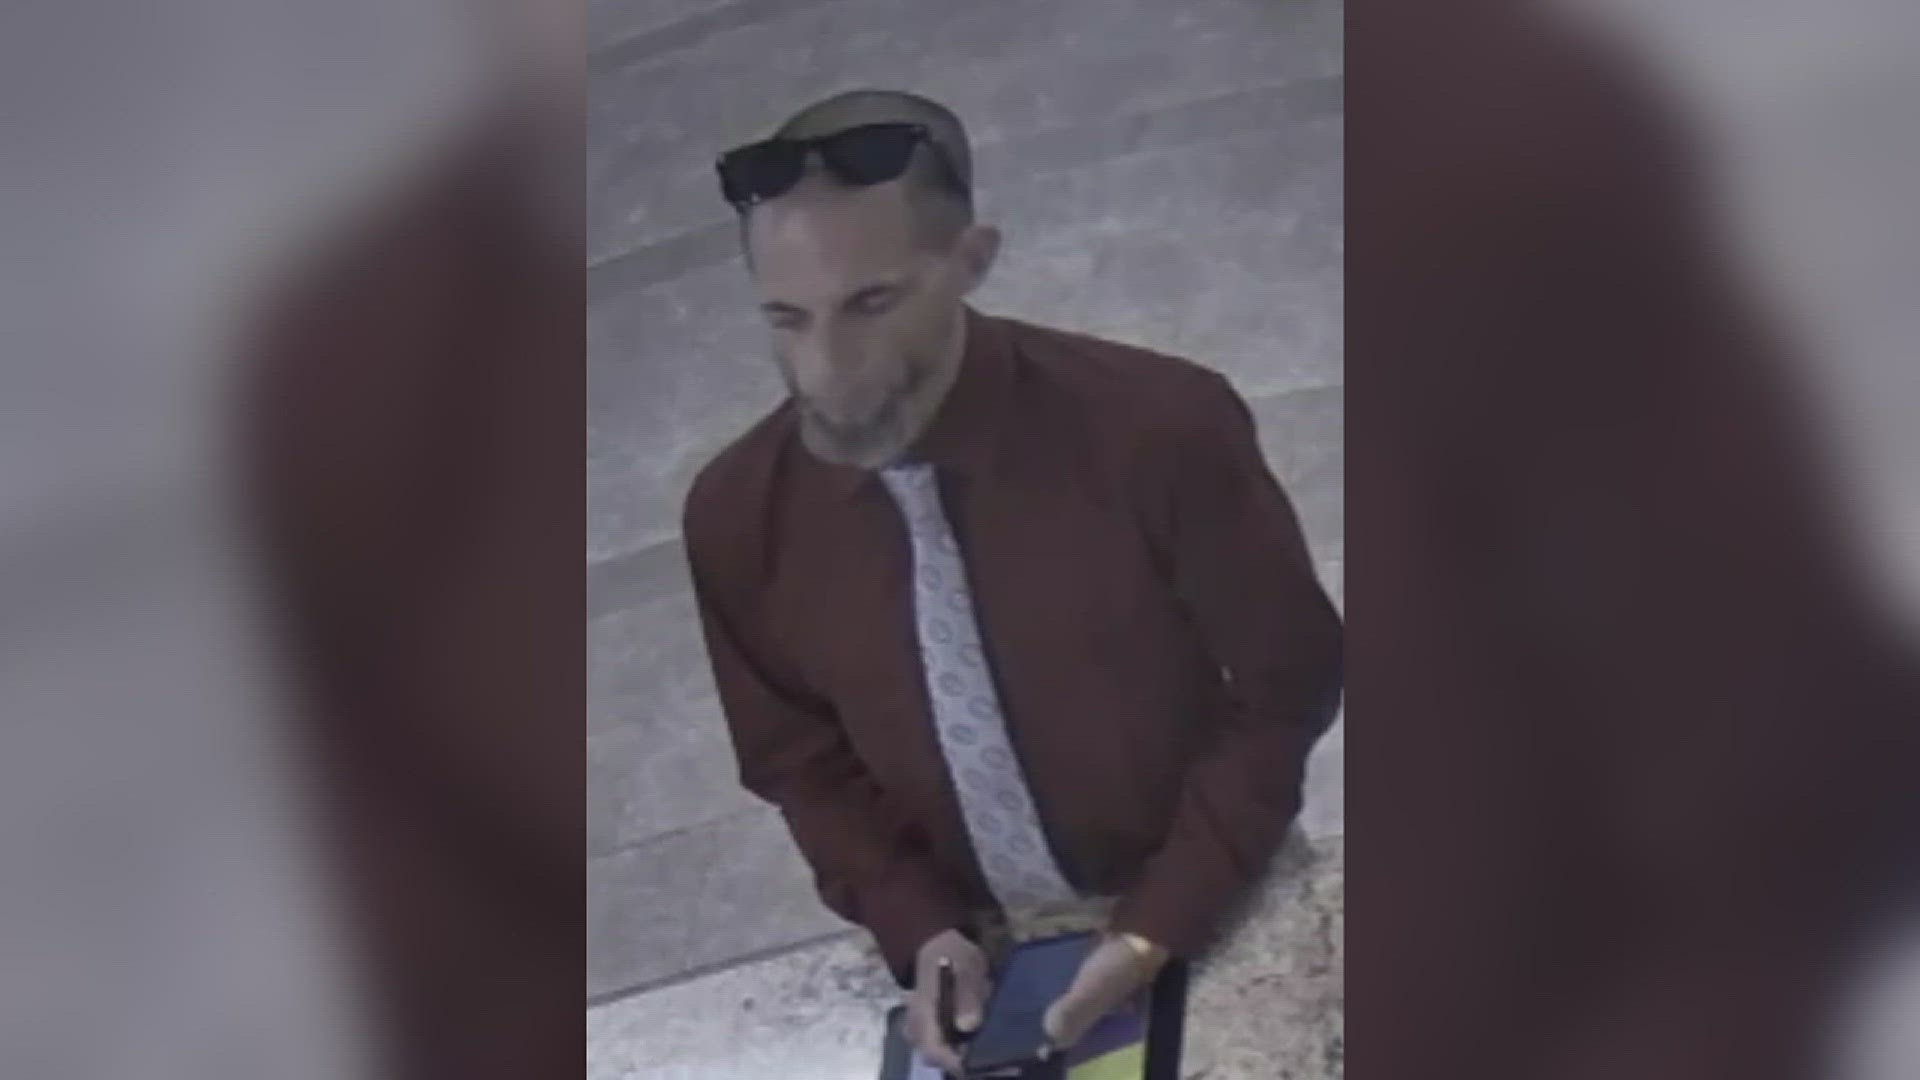 Police in Beaumont are looking for a man they say attempted to fool tellers at a Beaumont credit union with a fake passport and nice shirt and tie.